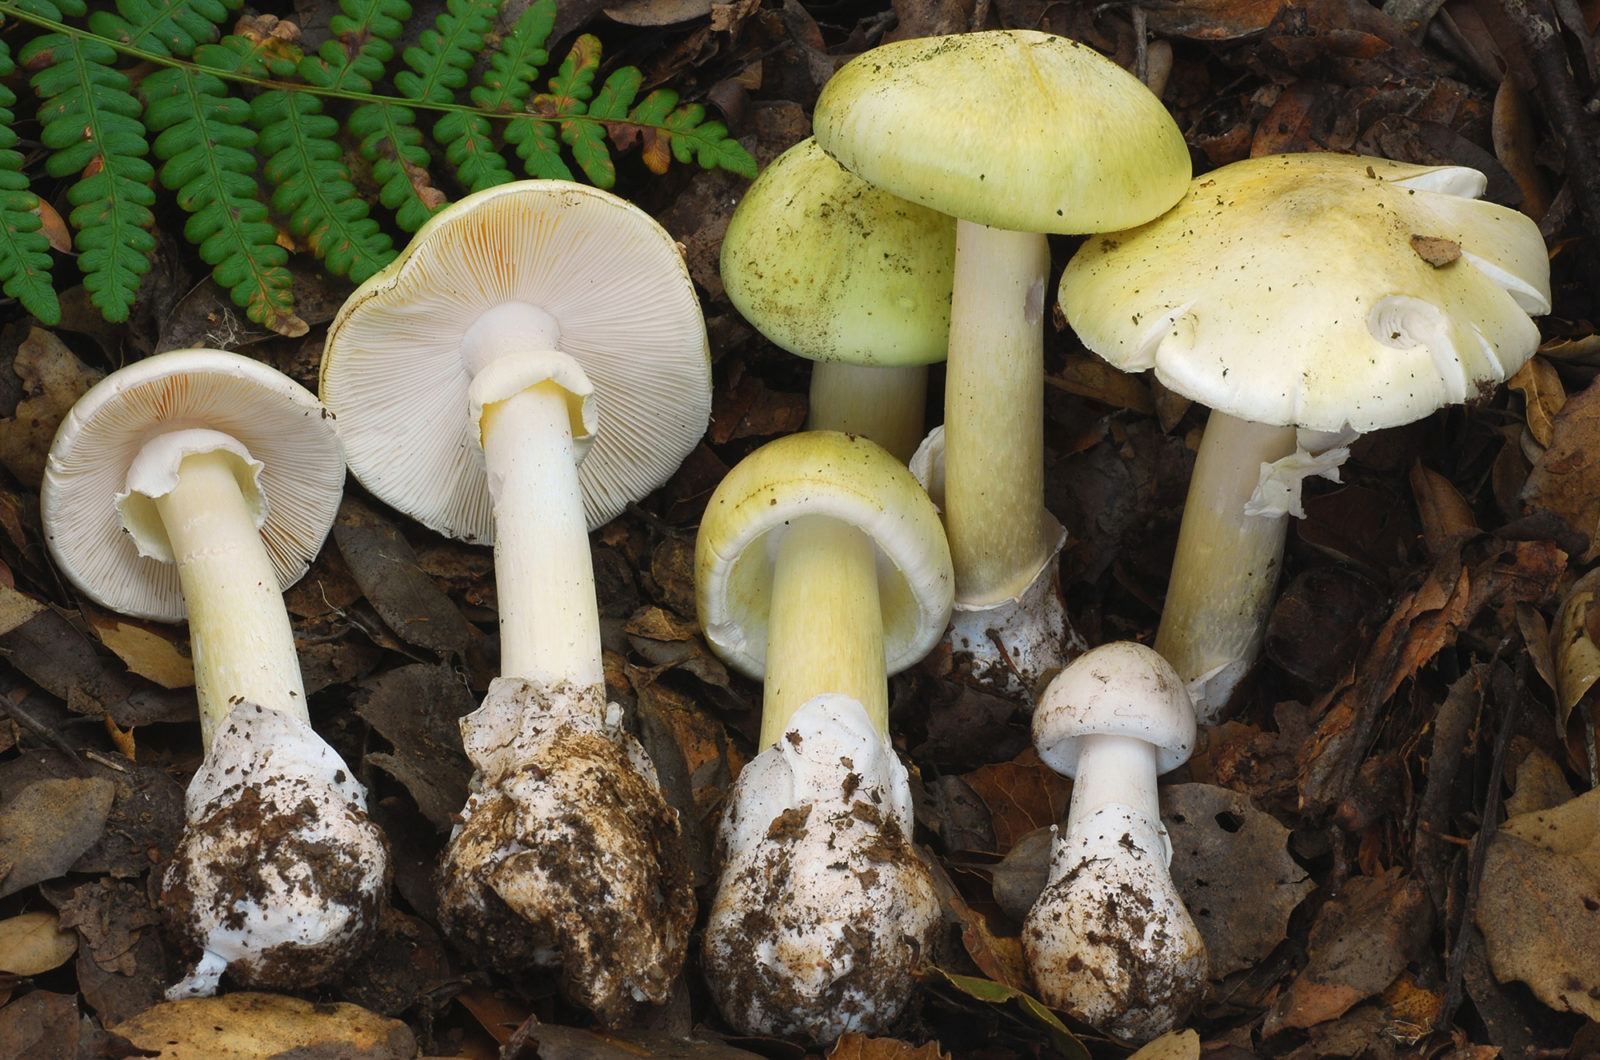 Bay Nature: Should I Worry About Death Cap Mushrooms in California?